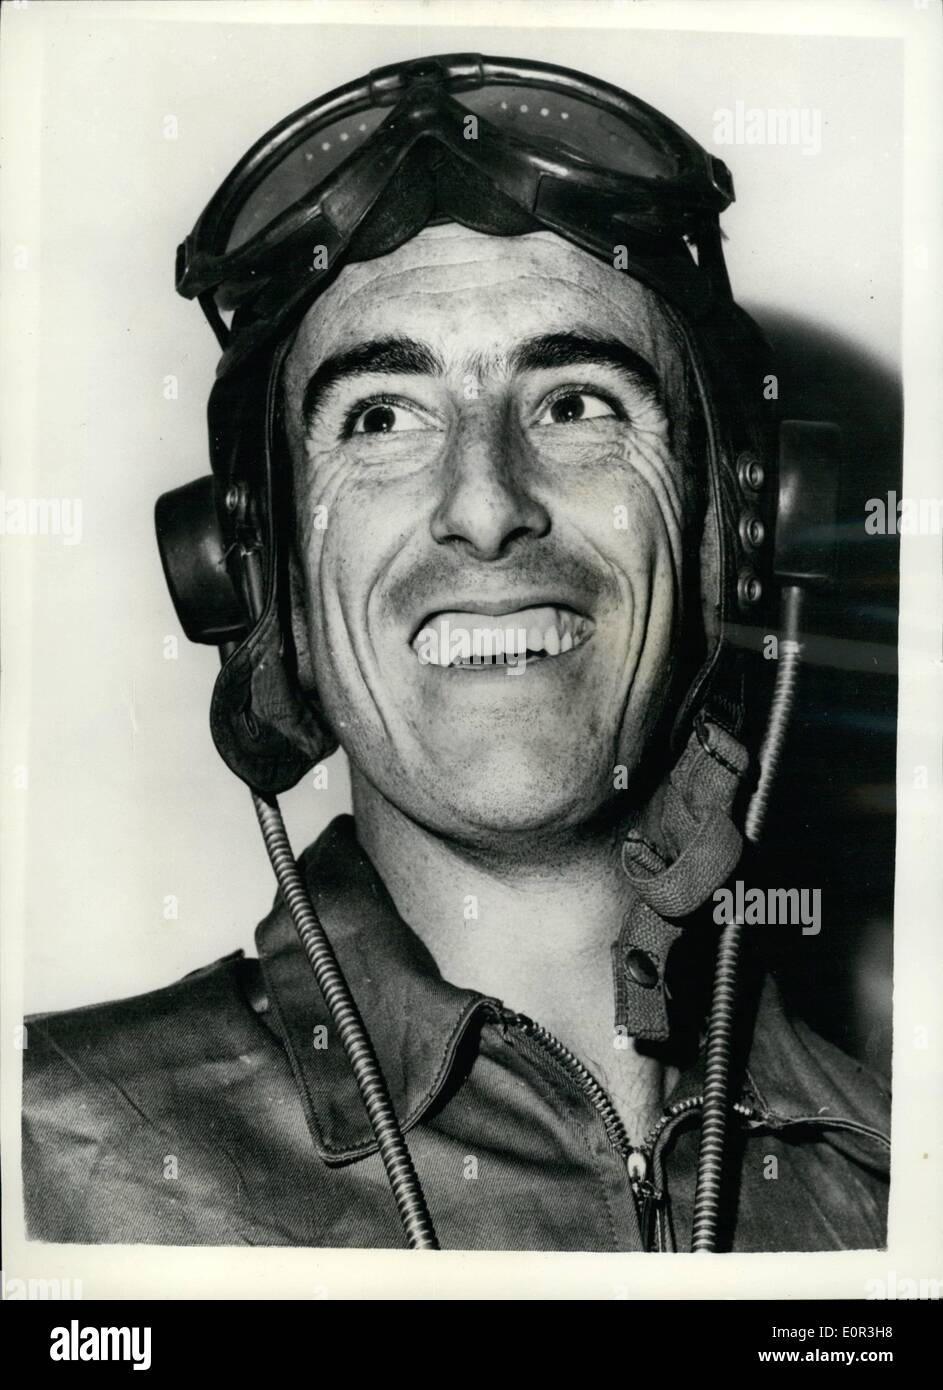 Nov. 11, 1957 - Polio victim works by Night and learns to fly by day. Australian Polio victim - 23 year old Peter ('' Stiff Legs'') Lynch, works by night as a telephone operator - at Leichhardt, Australia - and spends much of his day time learning to fly with the Royal Aero Club. In spite of his difficulties he has passed 21 examinations . He is still paralysed and has spent five months in bed. He can only operate the rudder bar by pushing his legs forward with his hands. Lynch has spent over &200 in learning to fly. Photo shows Peterlynch - Polio victim who is learning to fly. Stock Photo